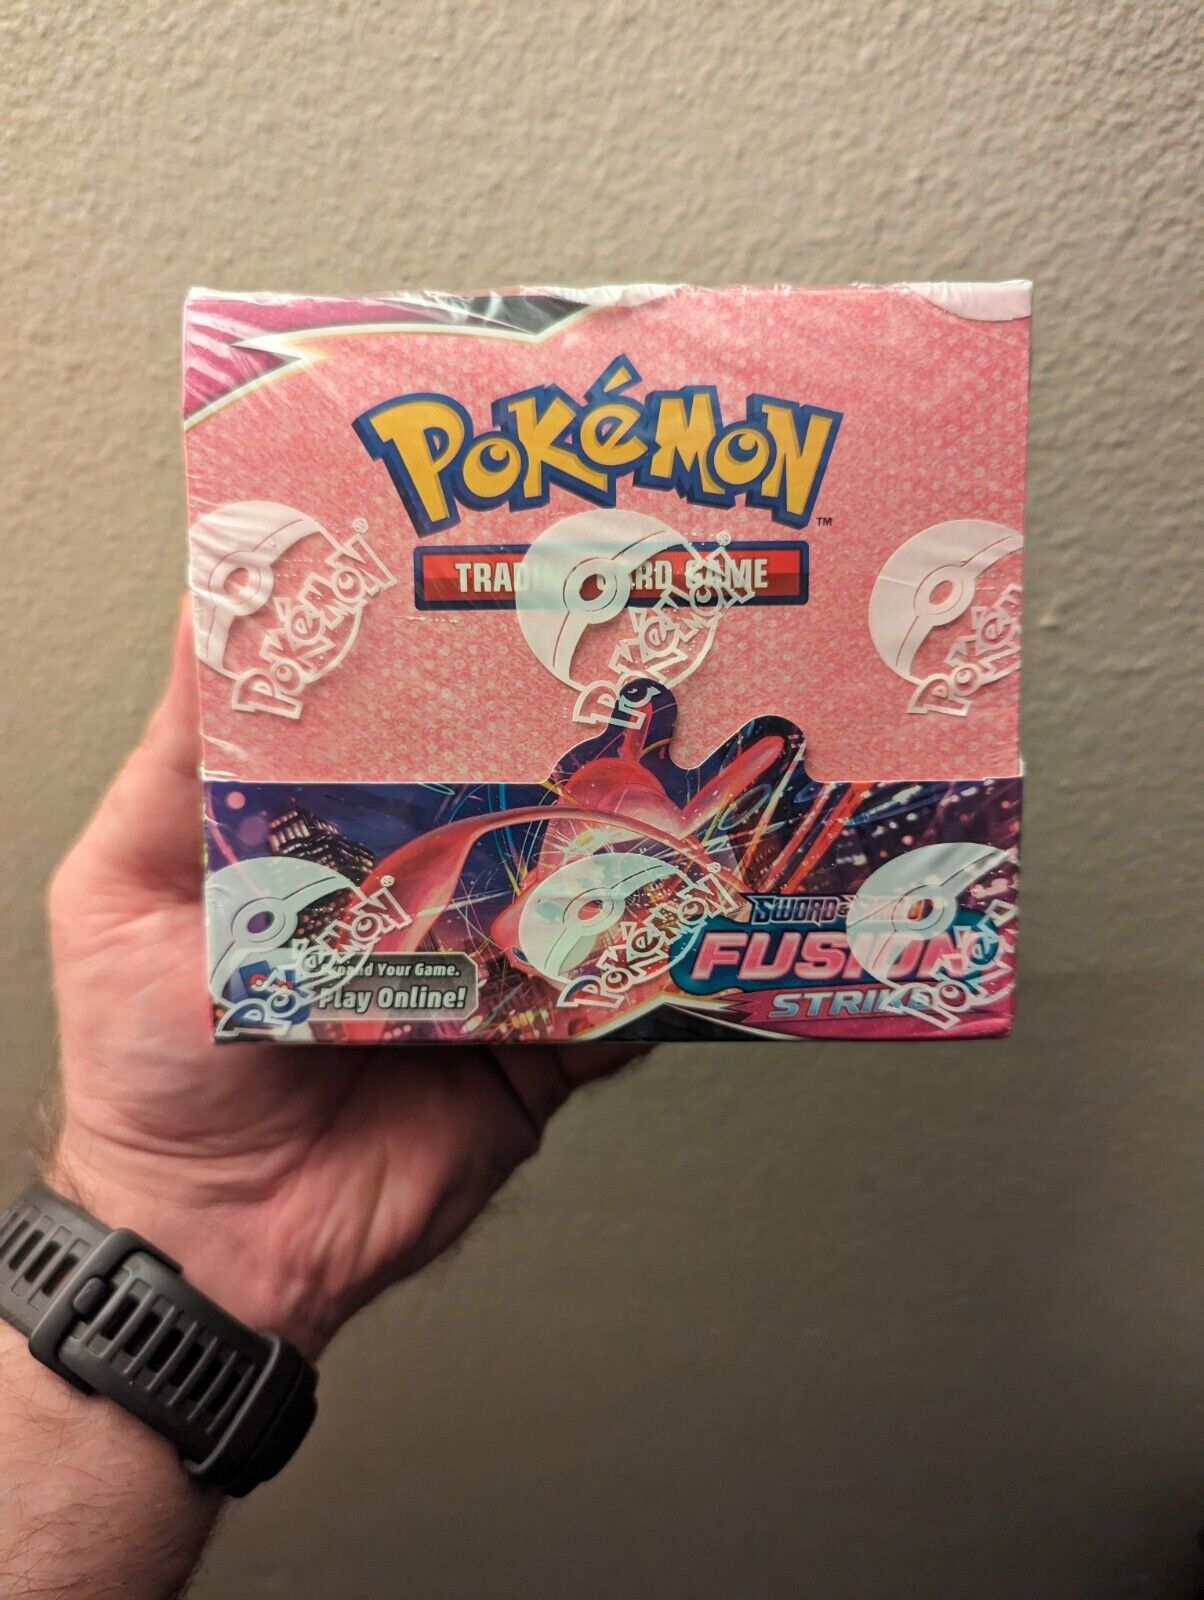 Pokemon Sword & Shield Fusion Strike Factory Sealed Booster Box MINT CONDITION 